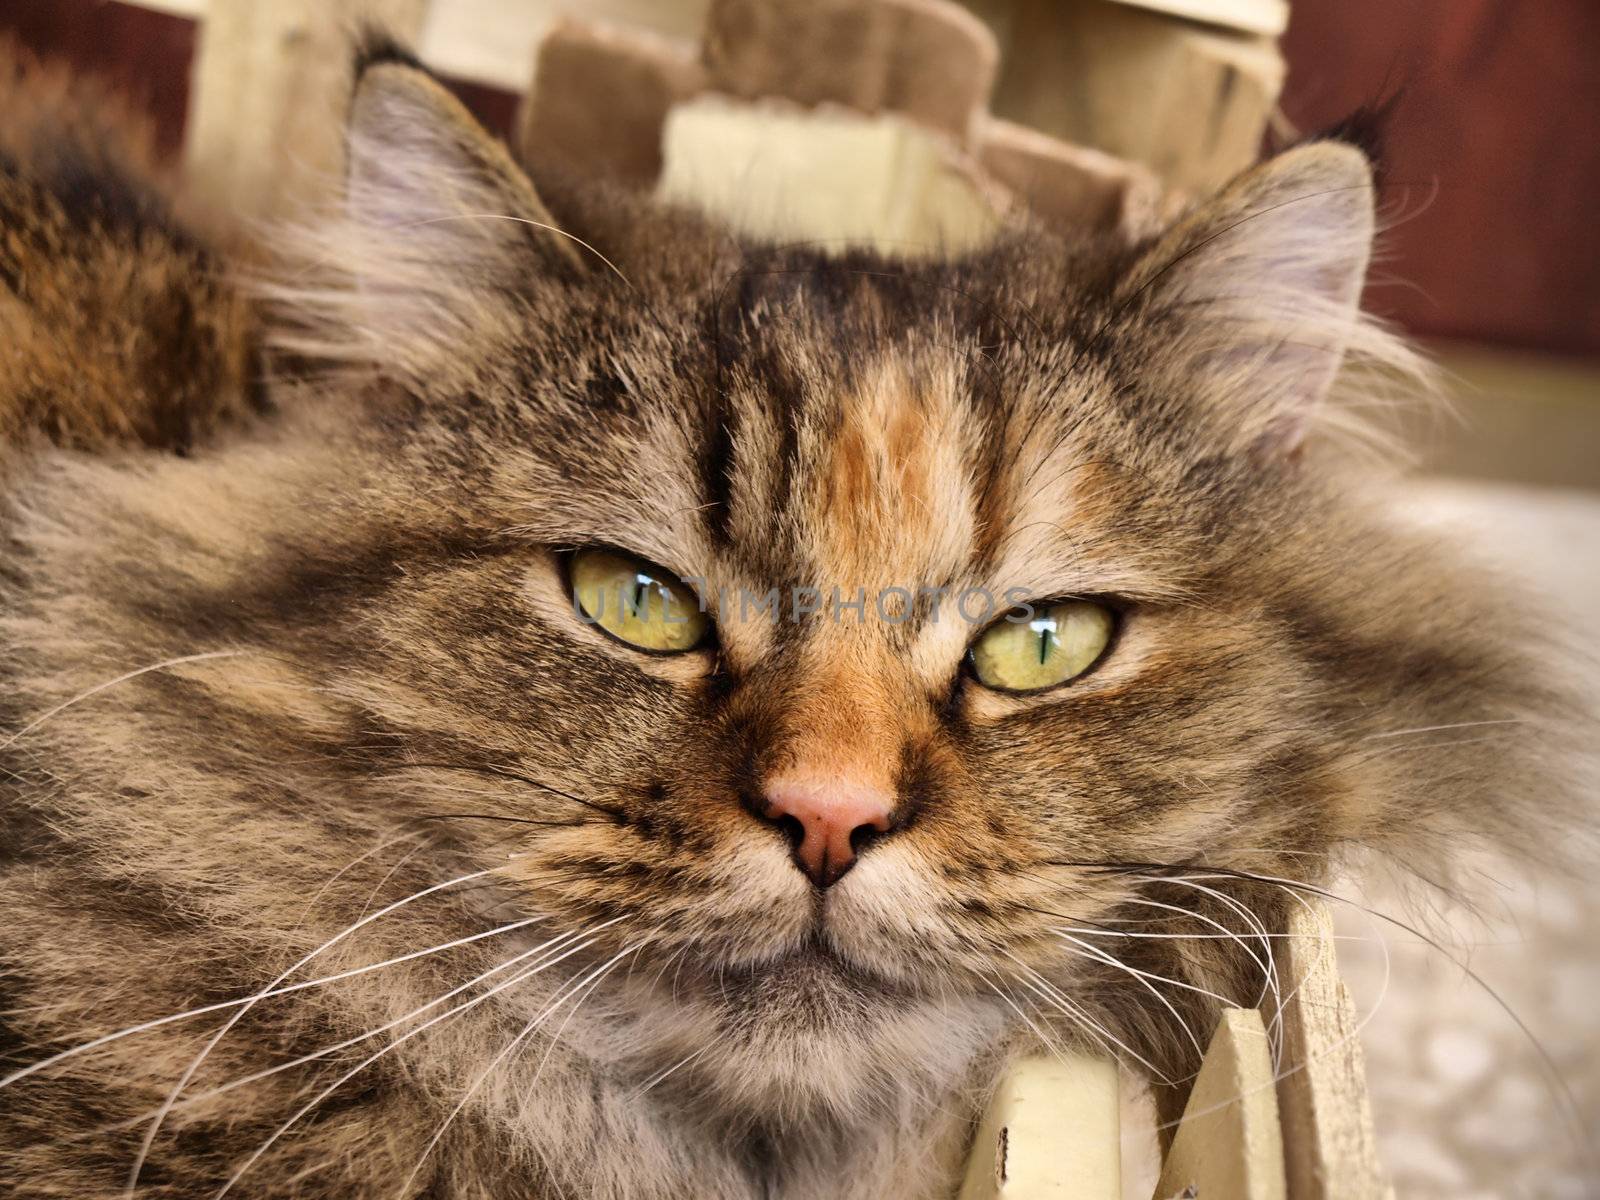 a HDR portrait of a homeless kitty with beautiful eyes